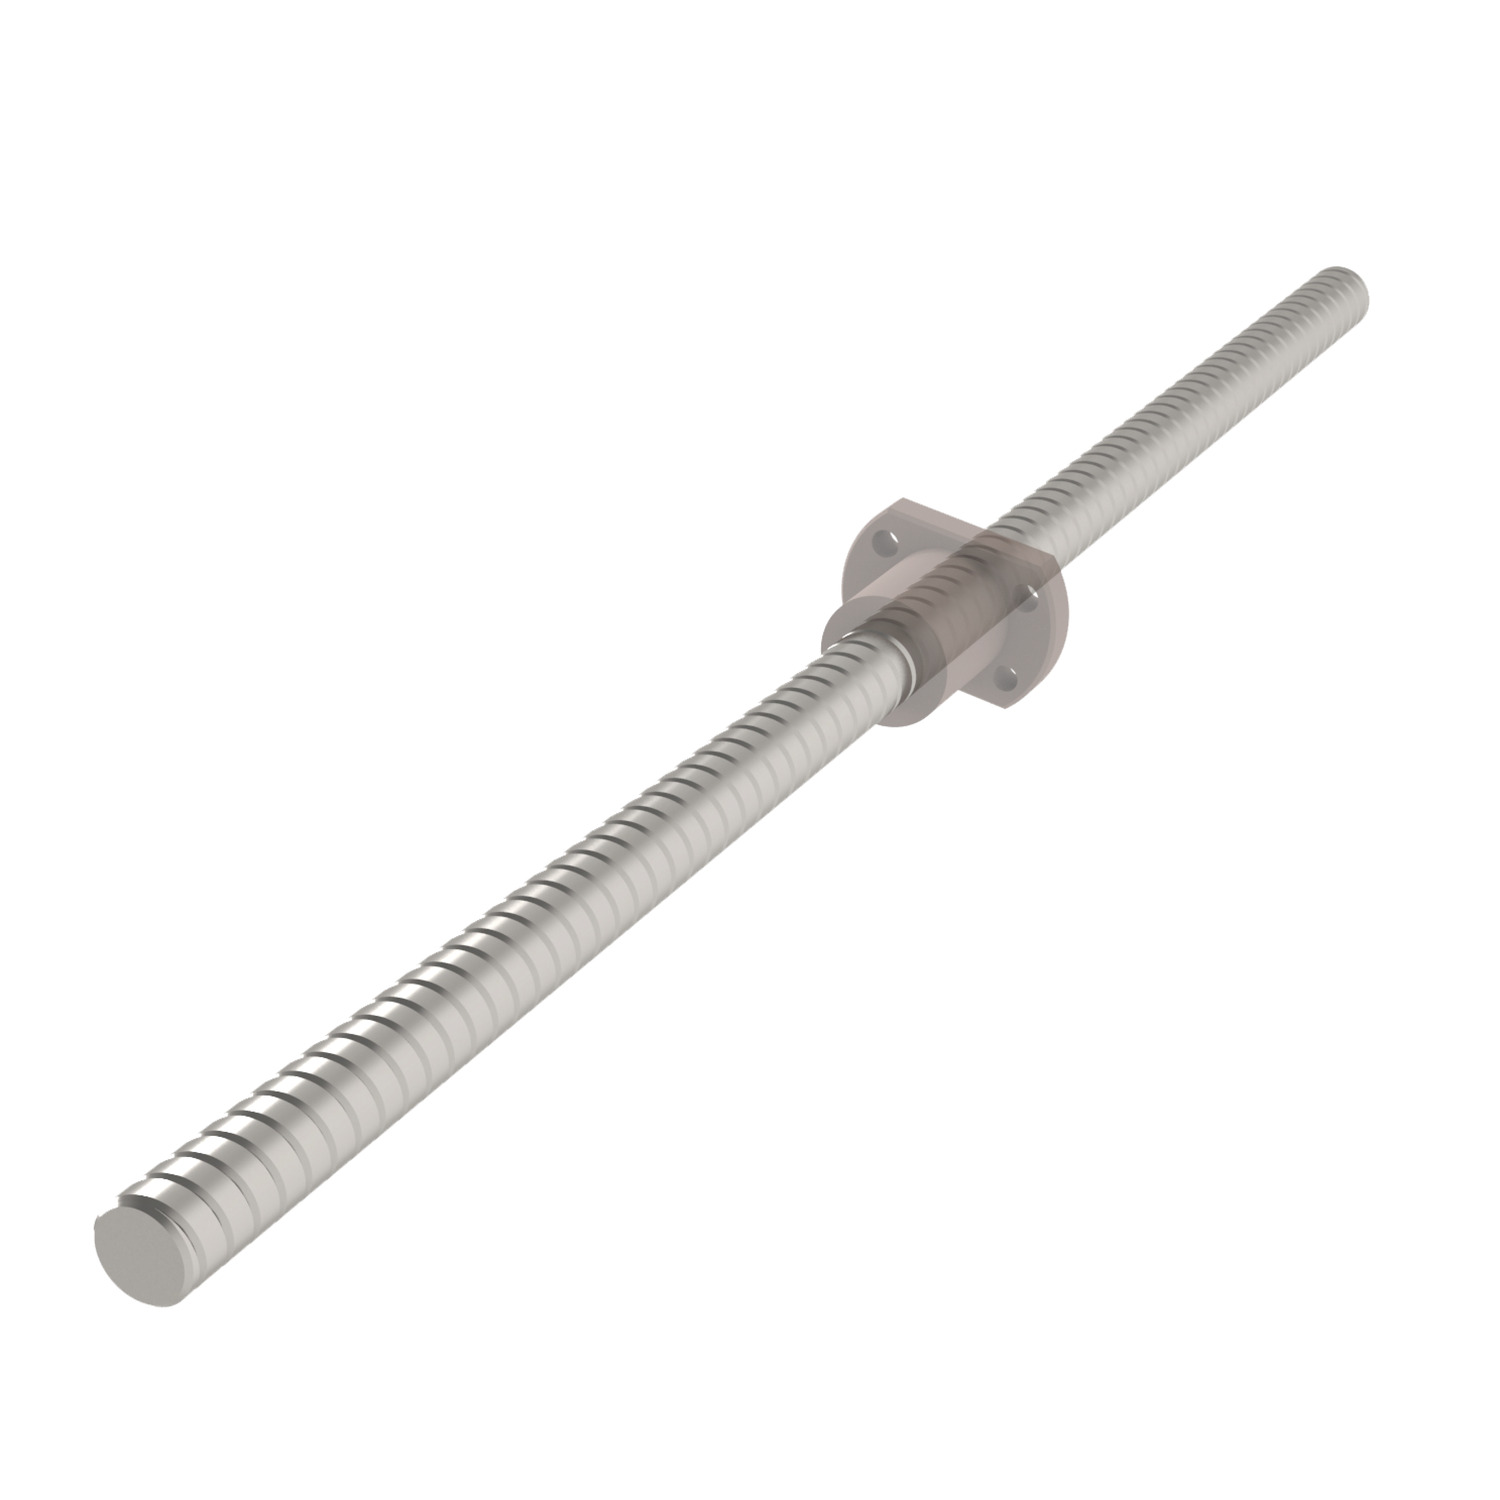 L1349 High Helix Lead Screws - Stainless